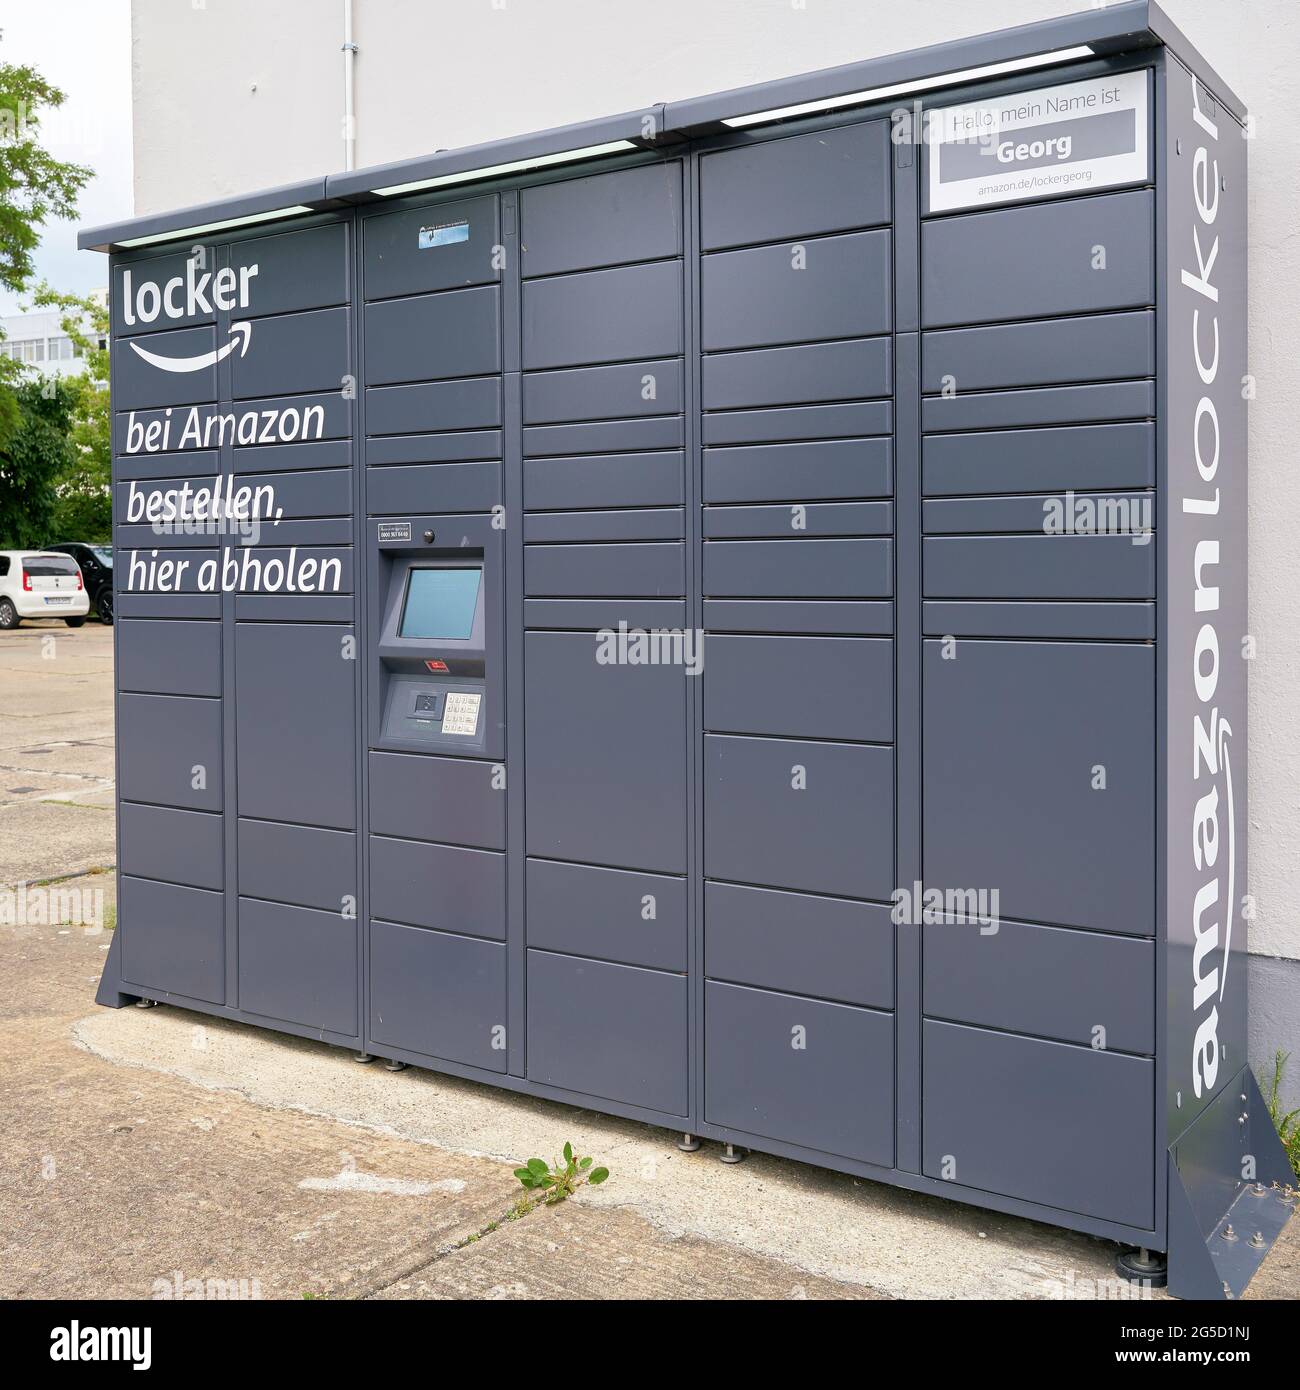 Amazon Locker Pick-up station with lockers for parcels from the mail-order  company Amazon in downtown Magdeburg in Germany Stock Photo - Alamy